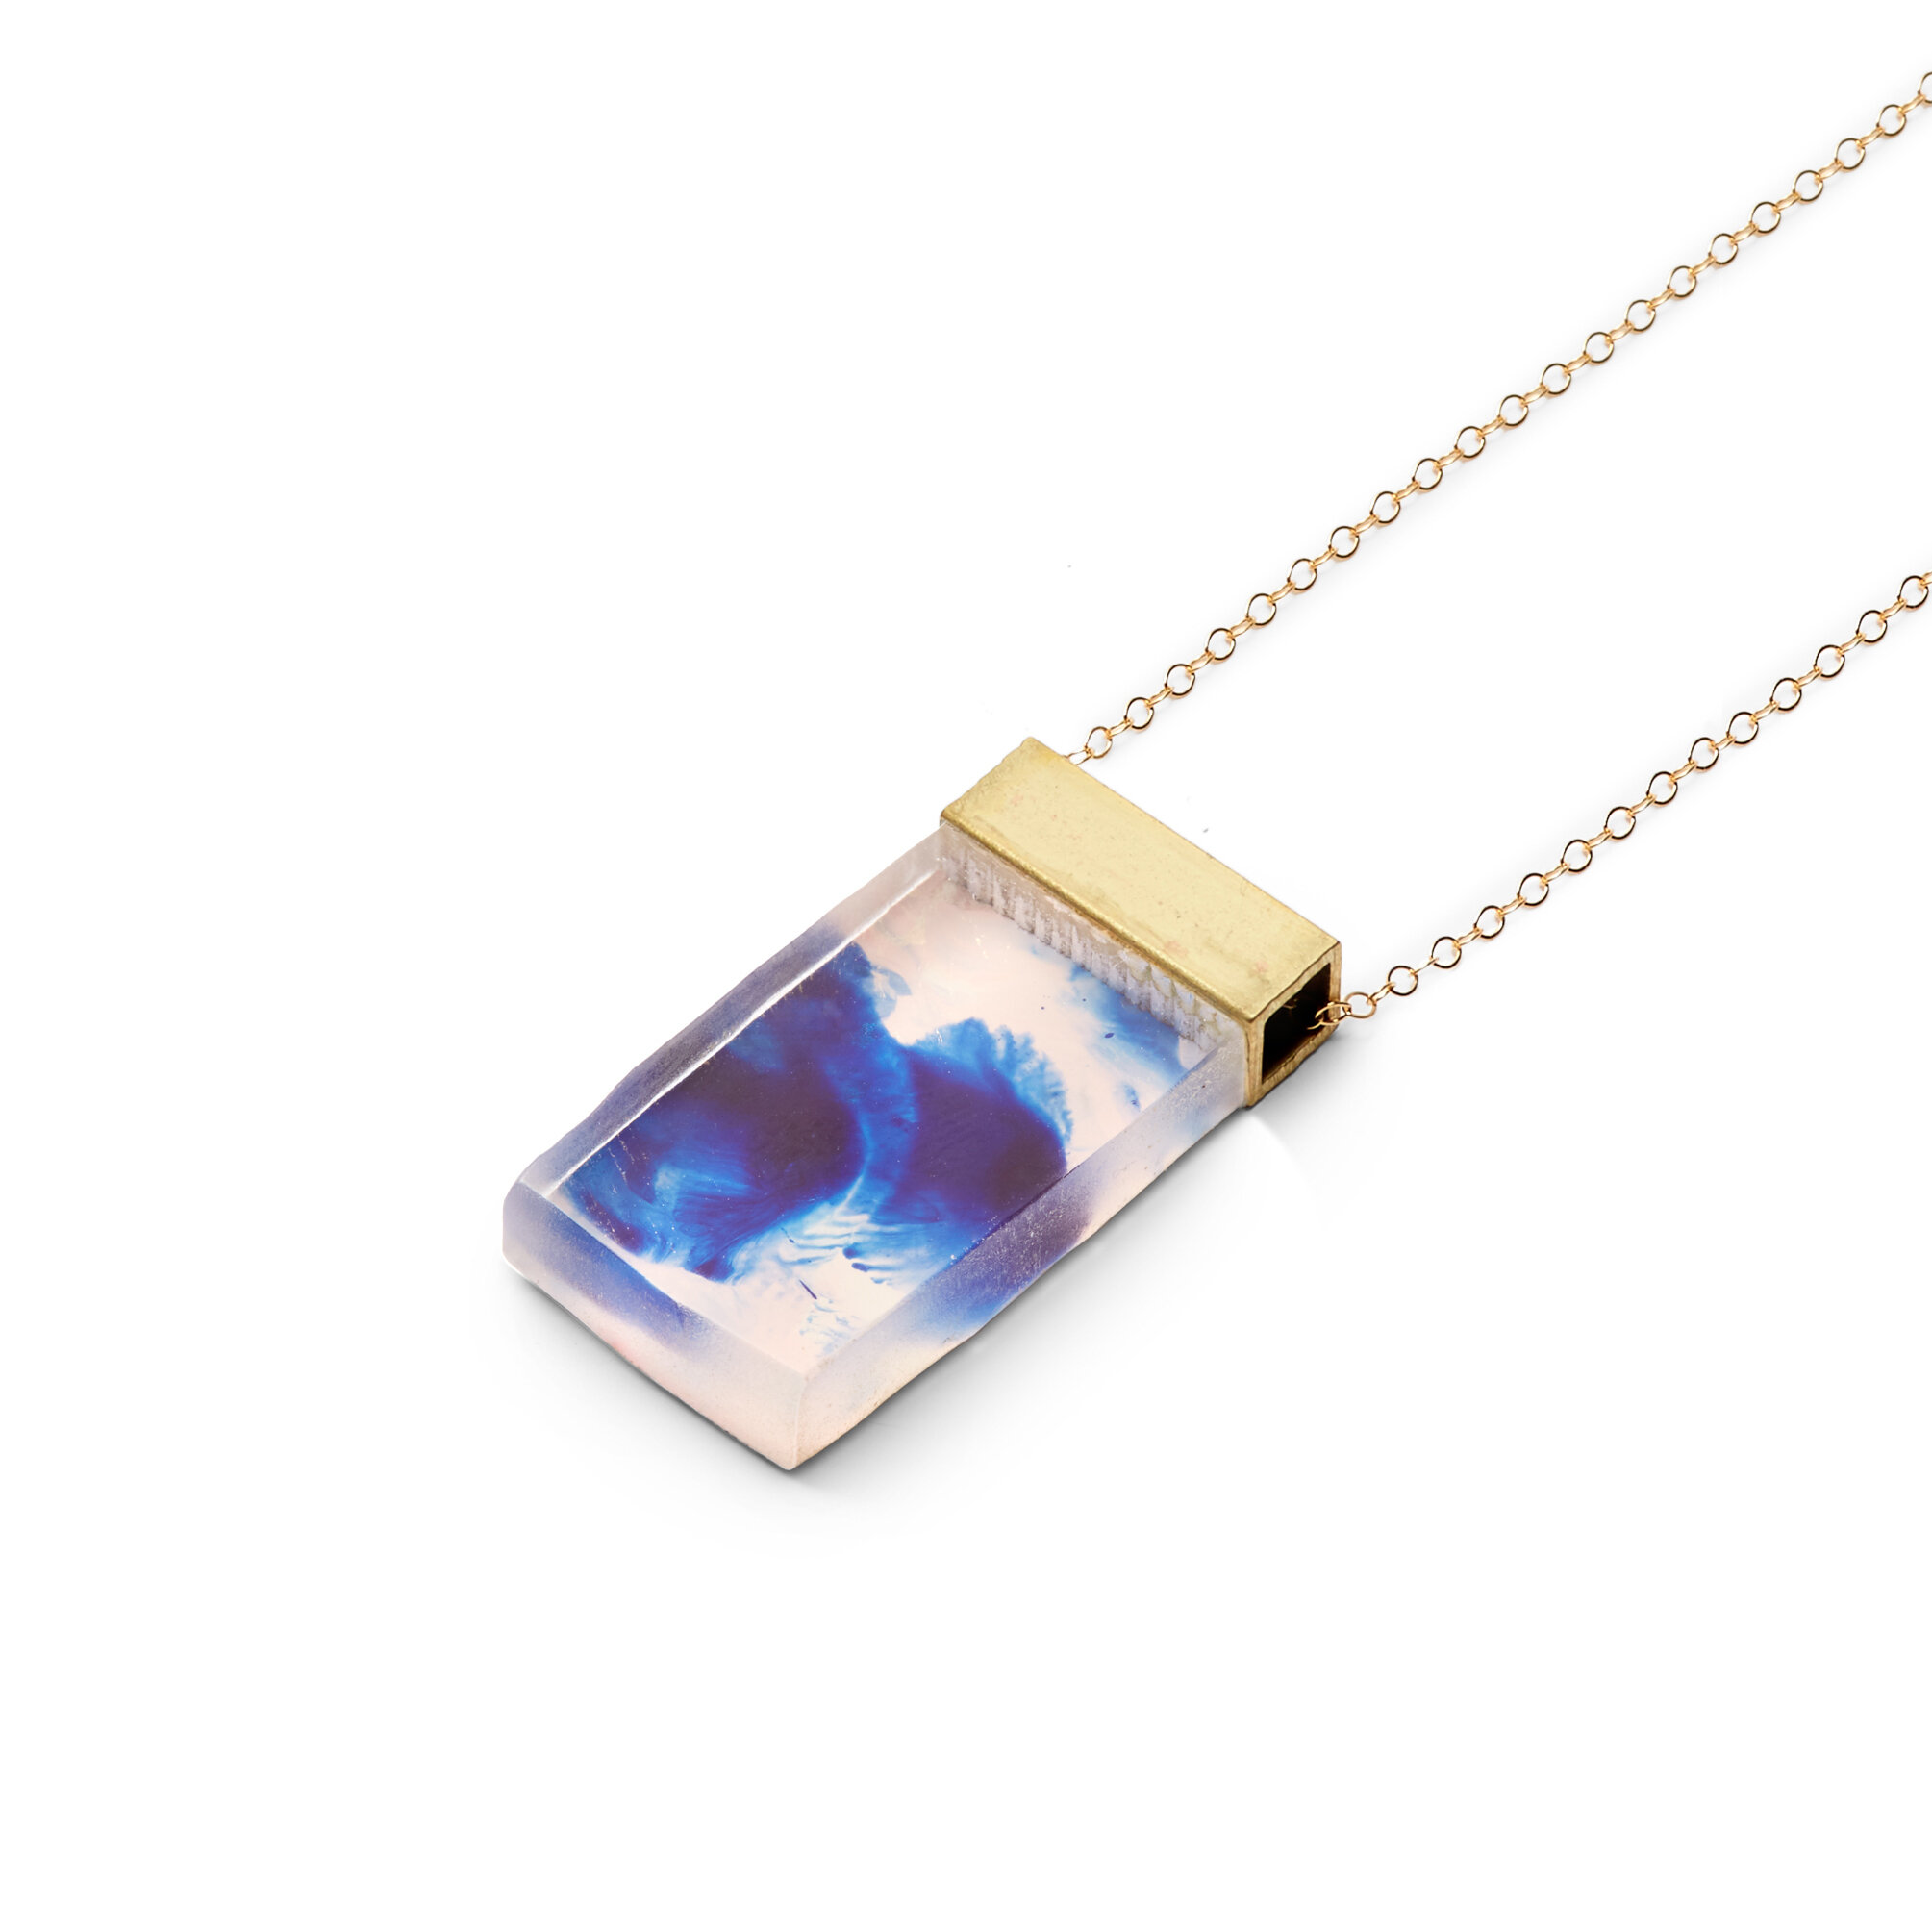 on-white-fine-jewelry-pendant-necklace-product-photo-example.JPG